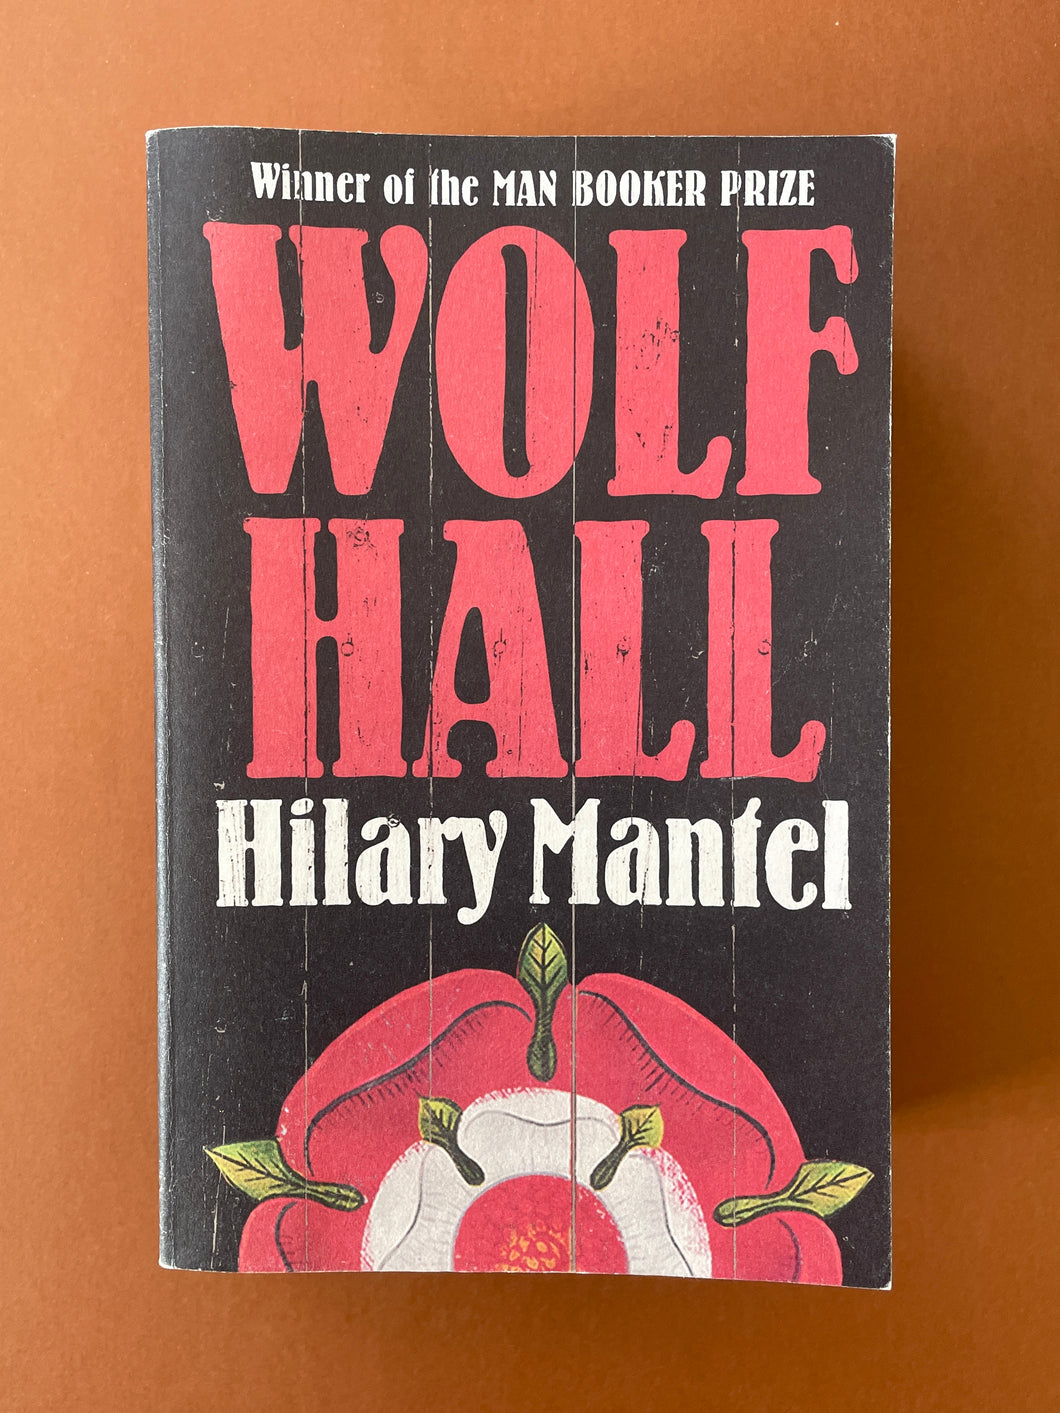 Wolf Hall by Hilary Mantel: photo of the front cover which shows very minor scuff marks along the edges.